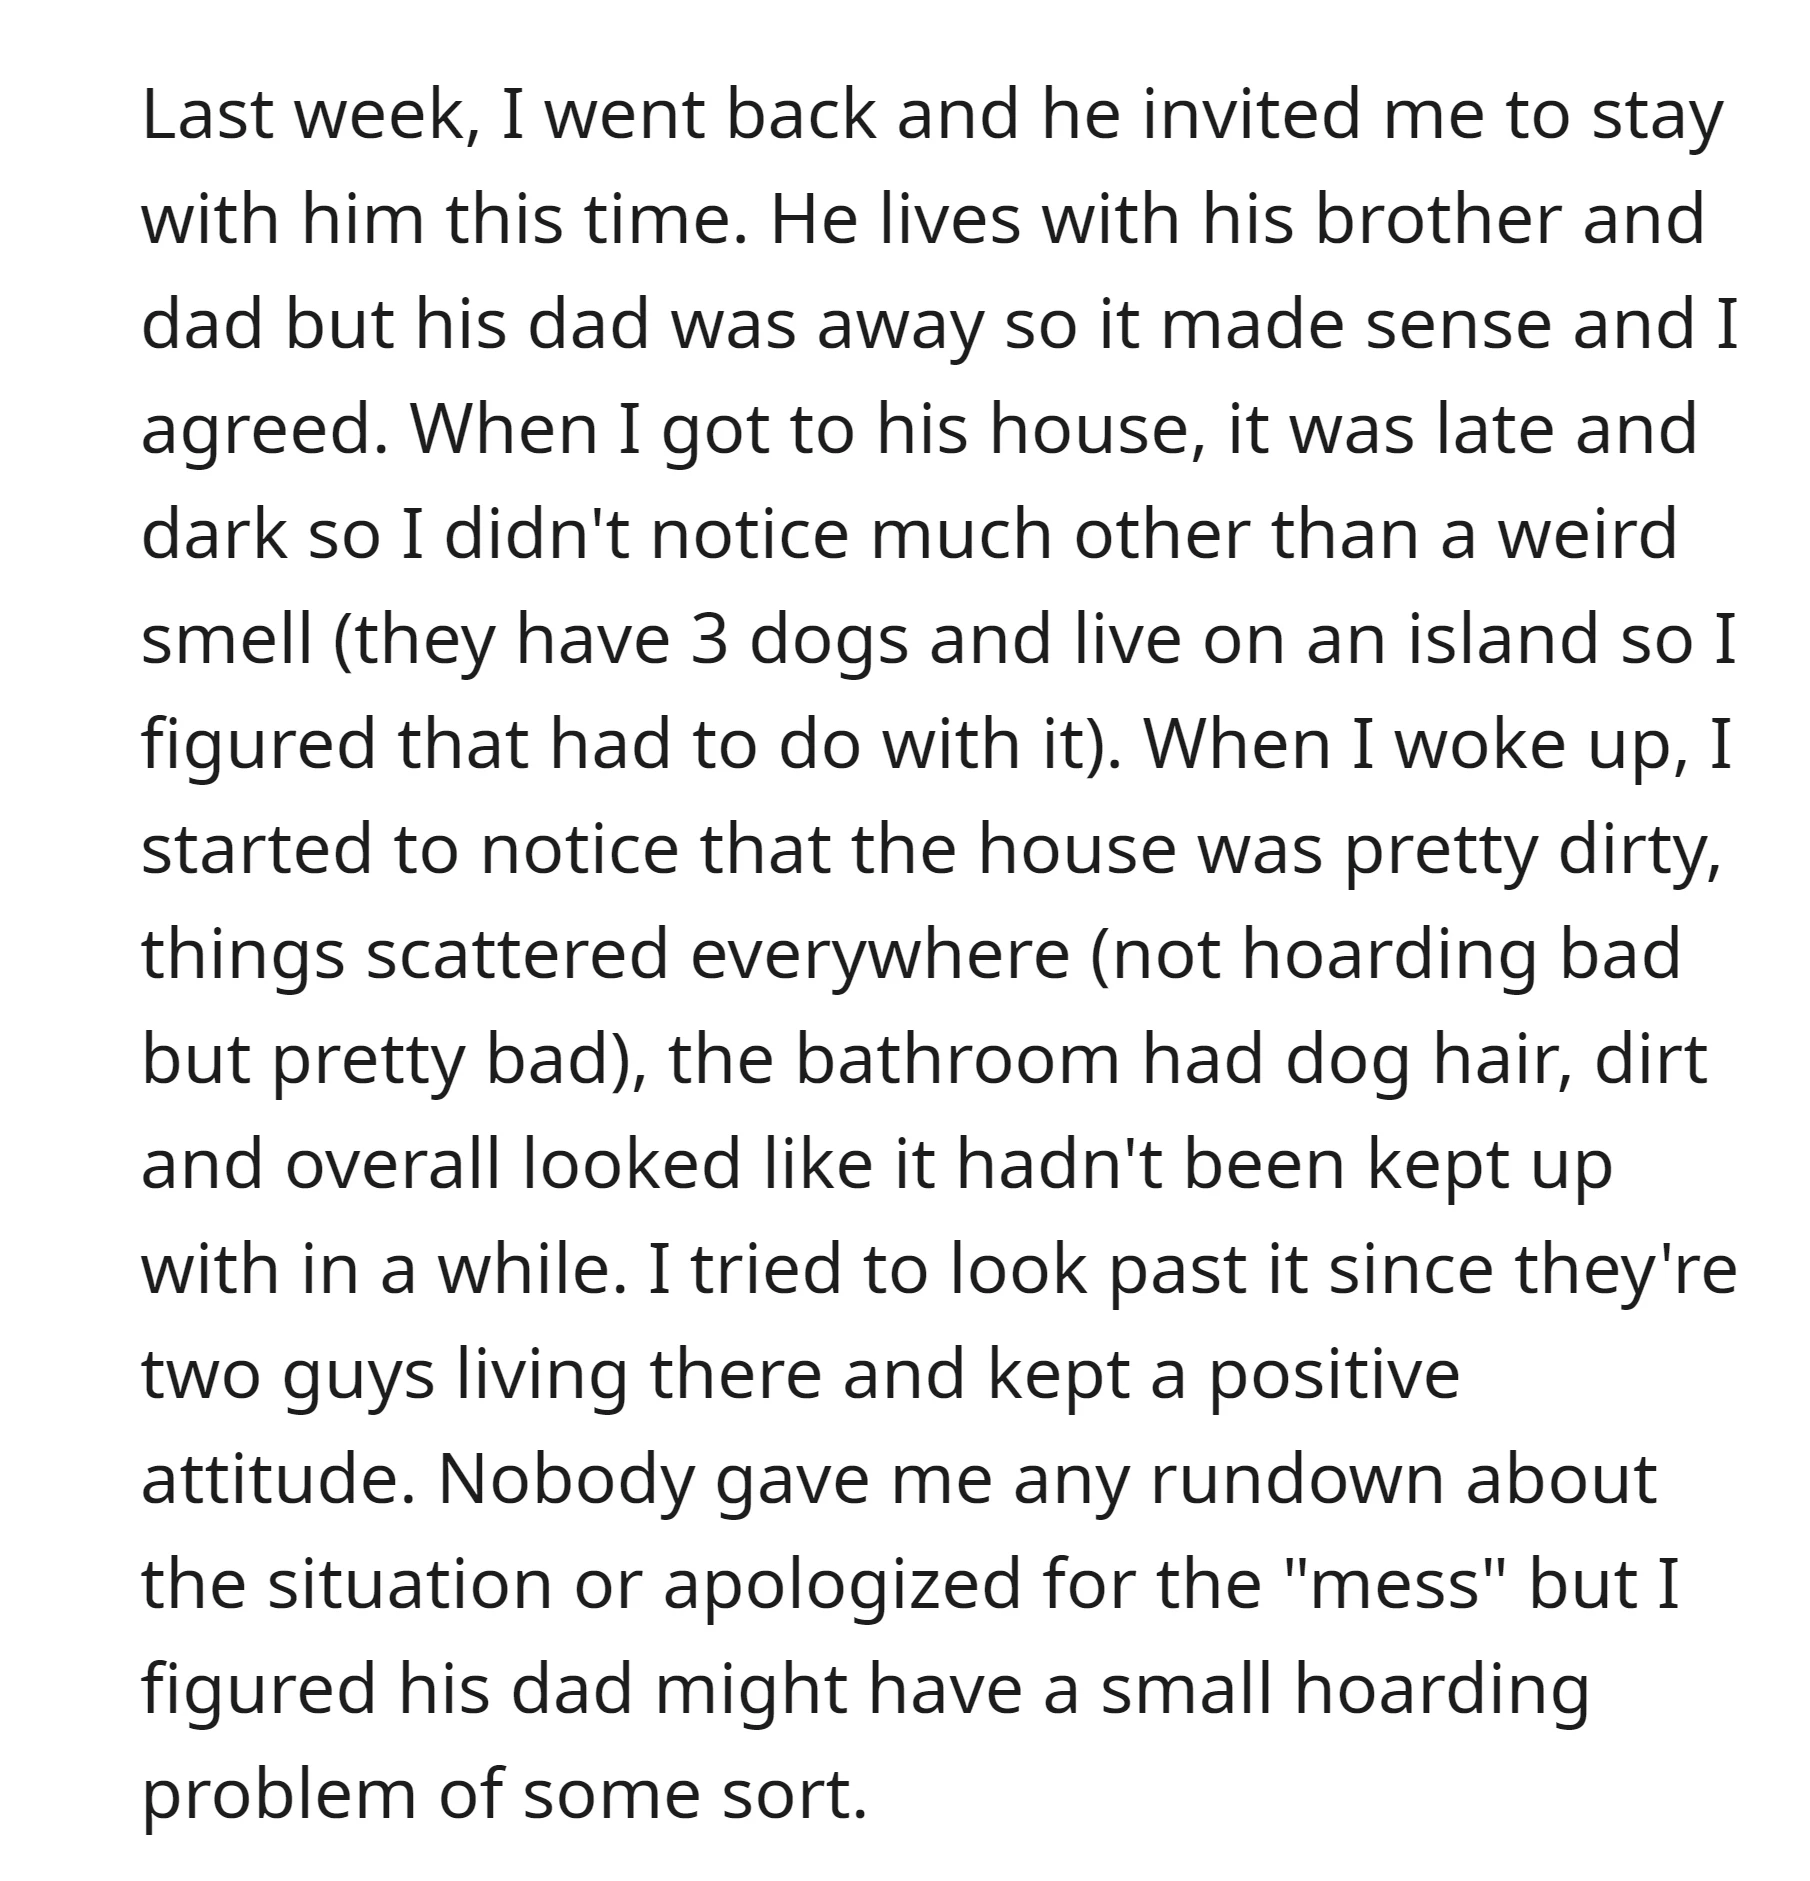 OP noticed a messy and dirty living environmen